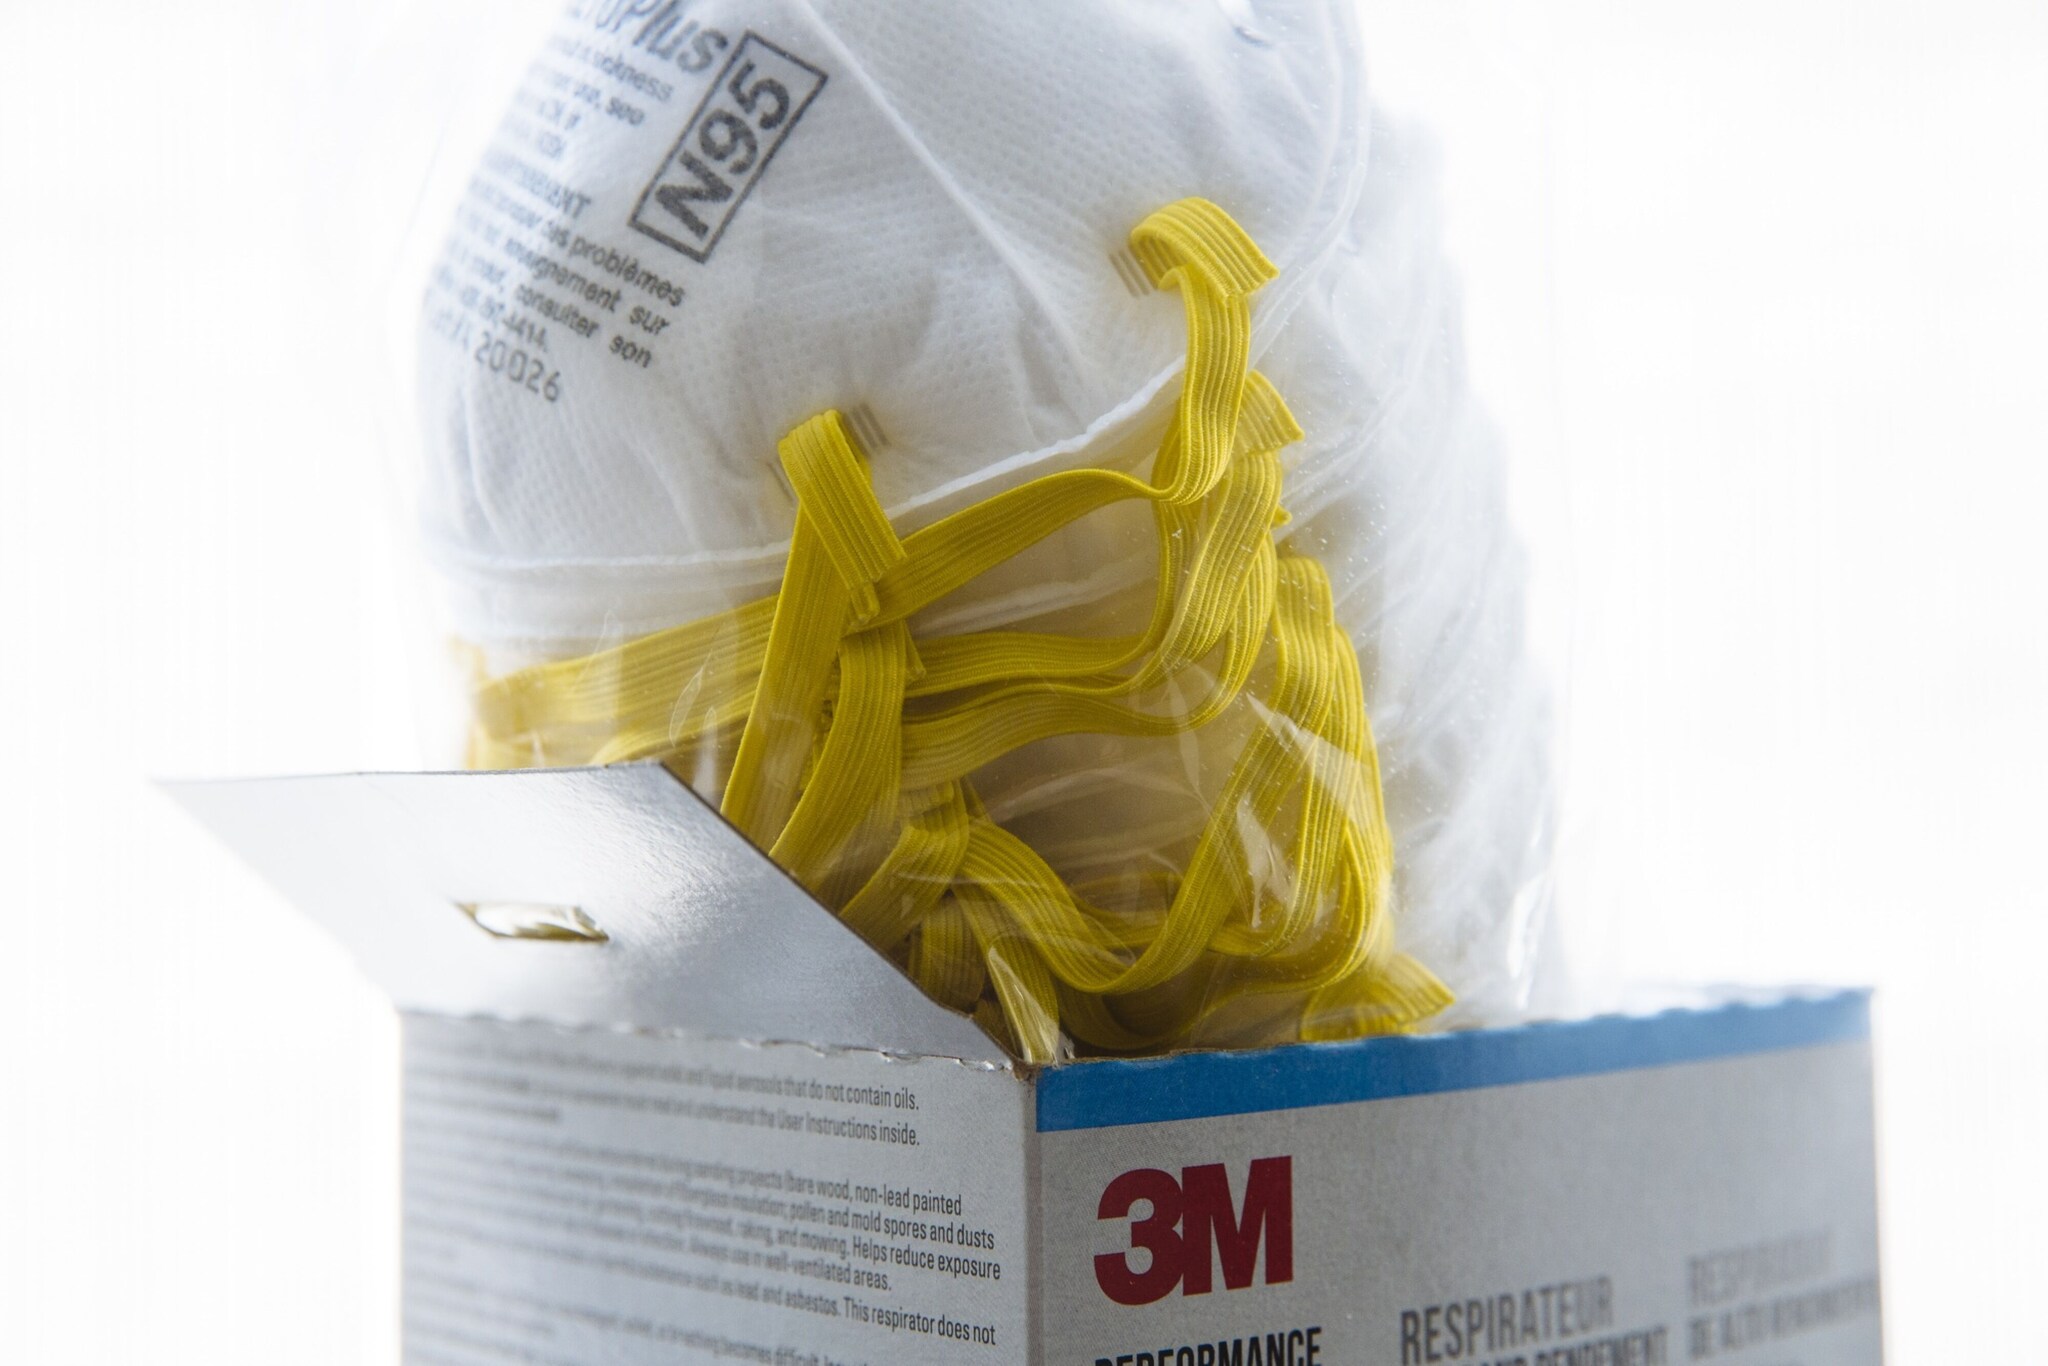 3M layoffs Manufacturer to cut 6,000 jobs in CEO’s latest move to trim